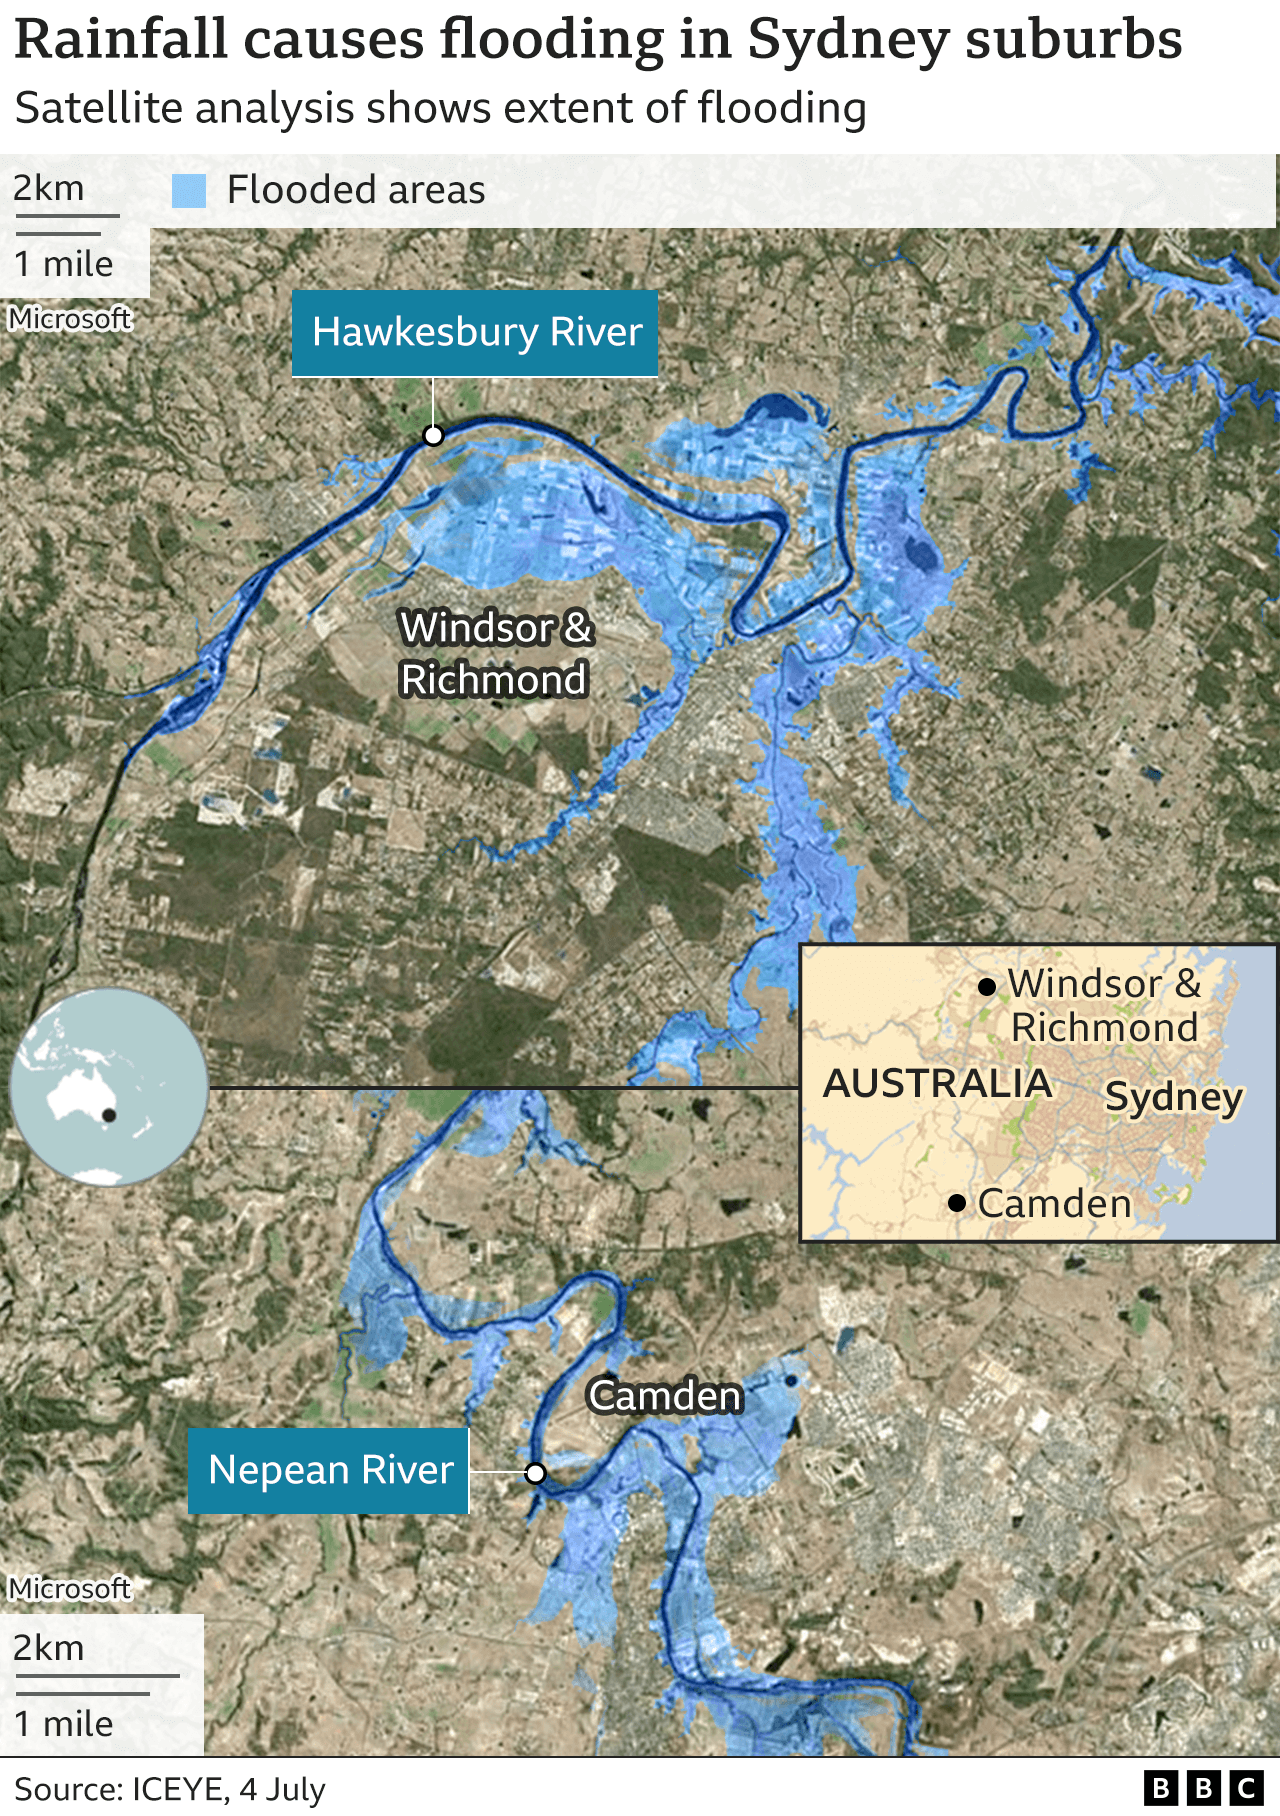 BBC graphic shows flooded areas of Sydney on a map